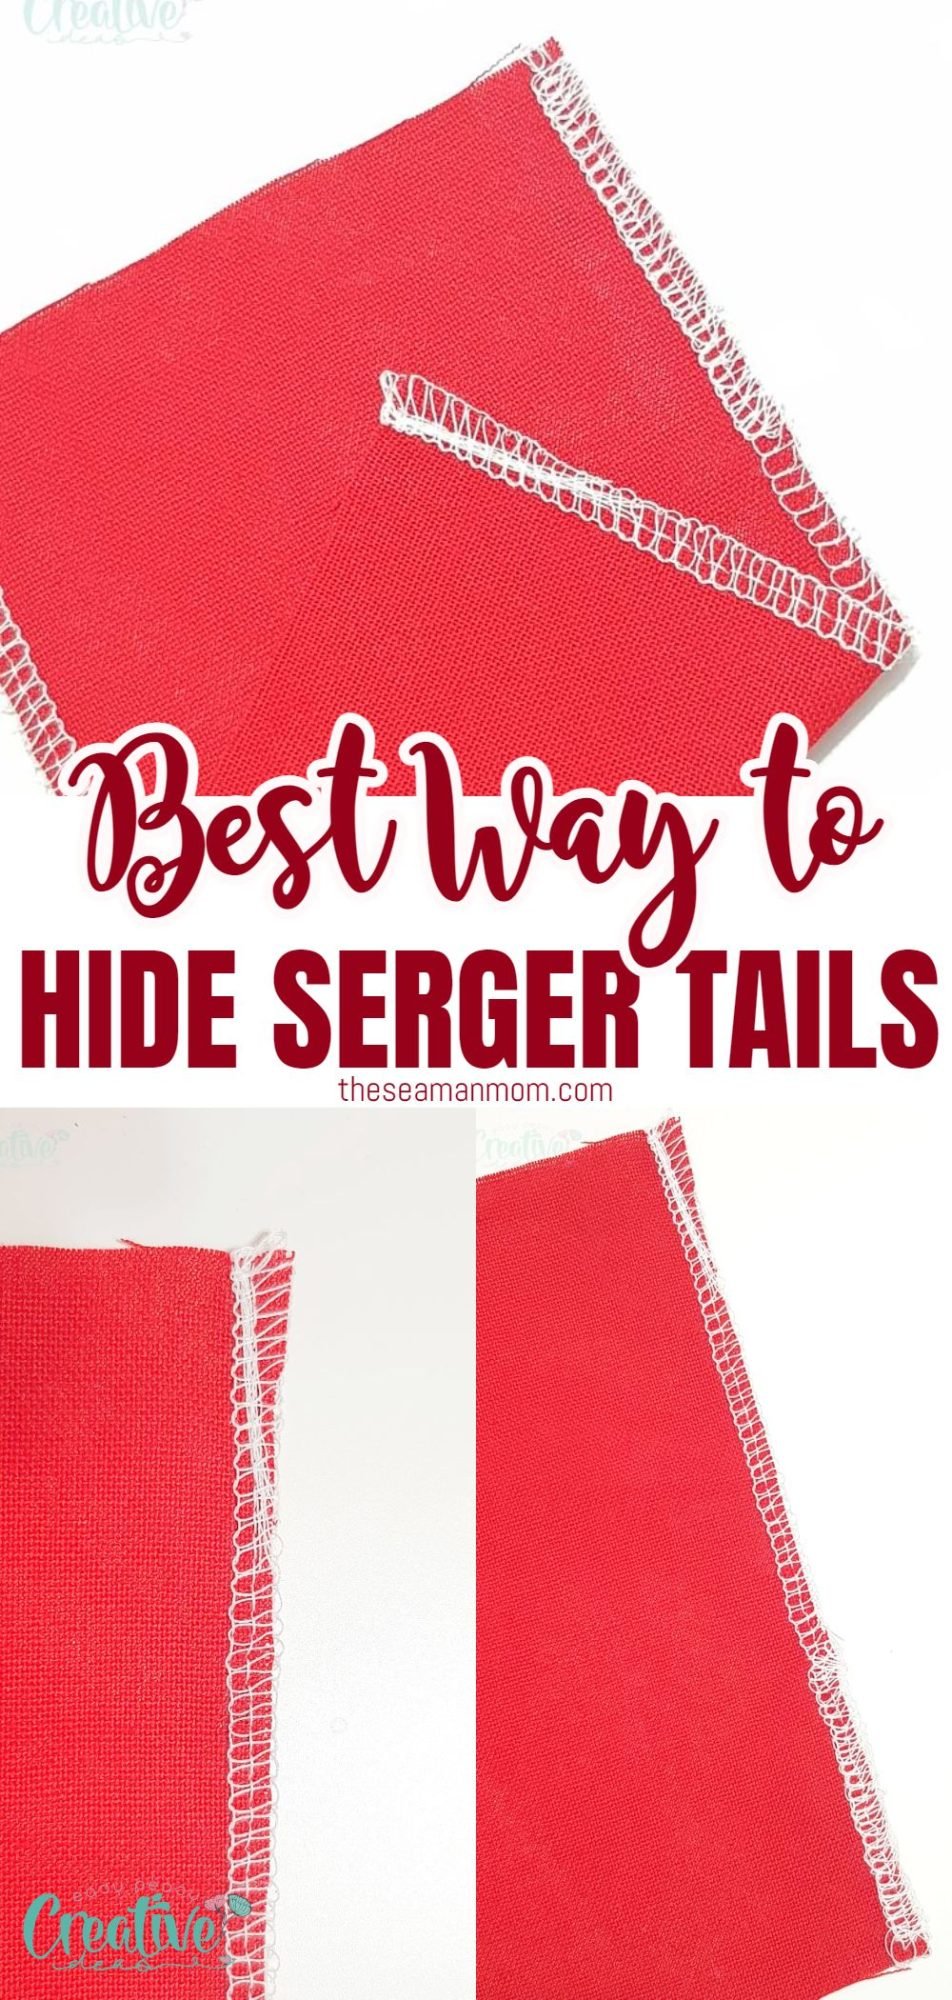 Photo collage illustrating the best method for how to hide serger tails at start and end